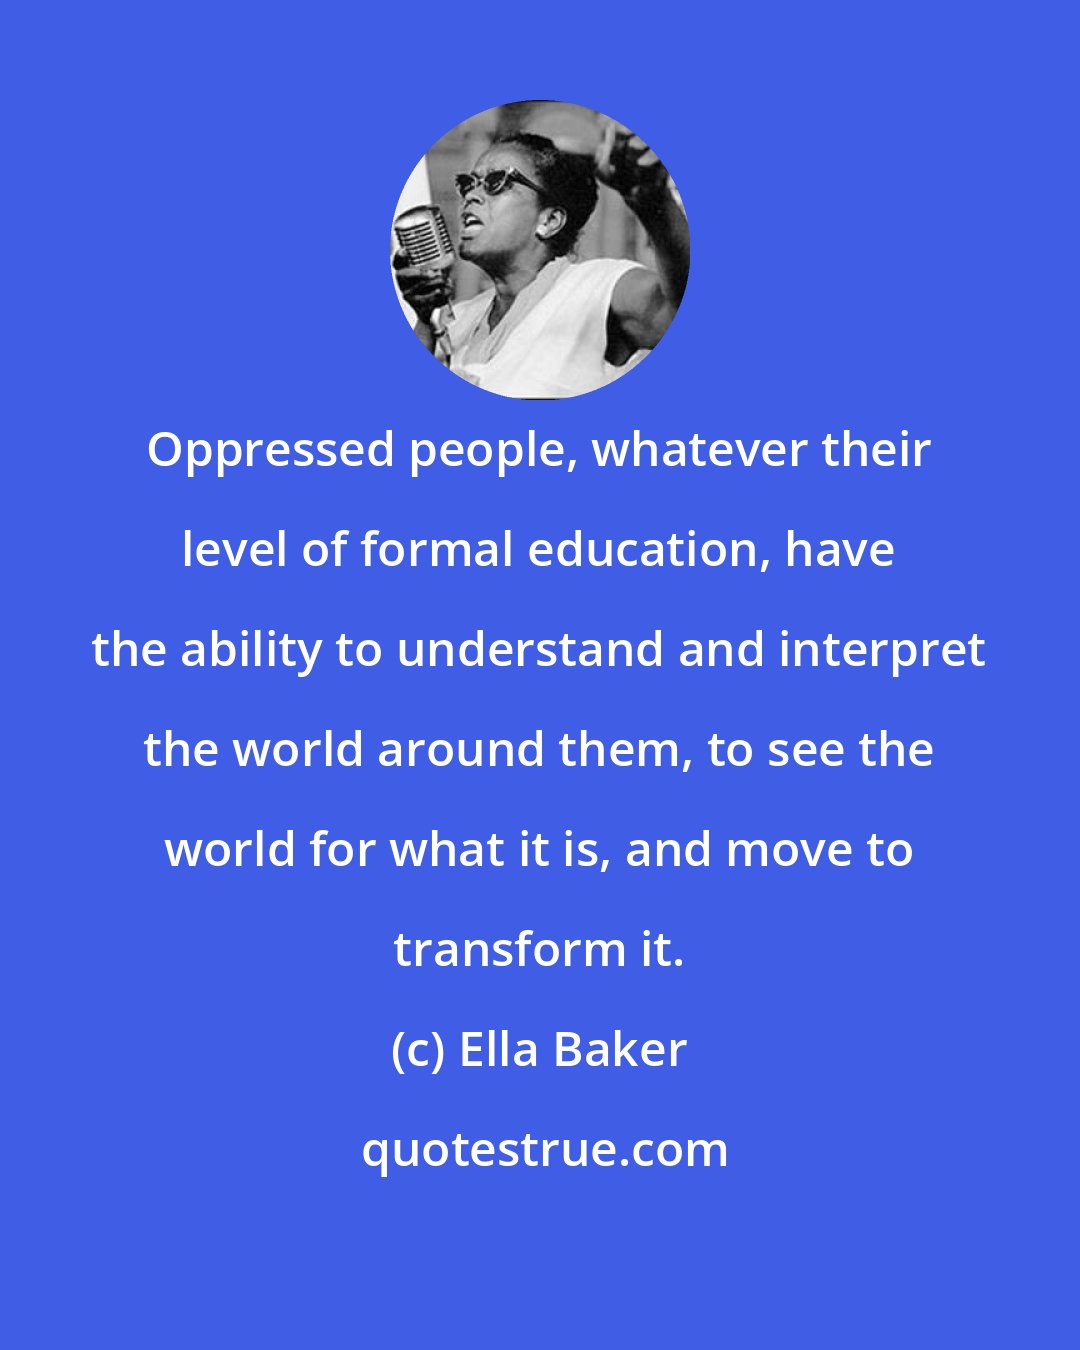 Ella Baker: Oppressed people, whatever their level of formal education, have the ability to understand and interpret the world around them, to see the world for what it is, and move to transform it.